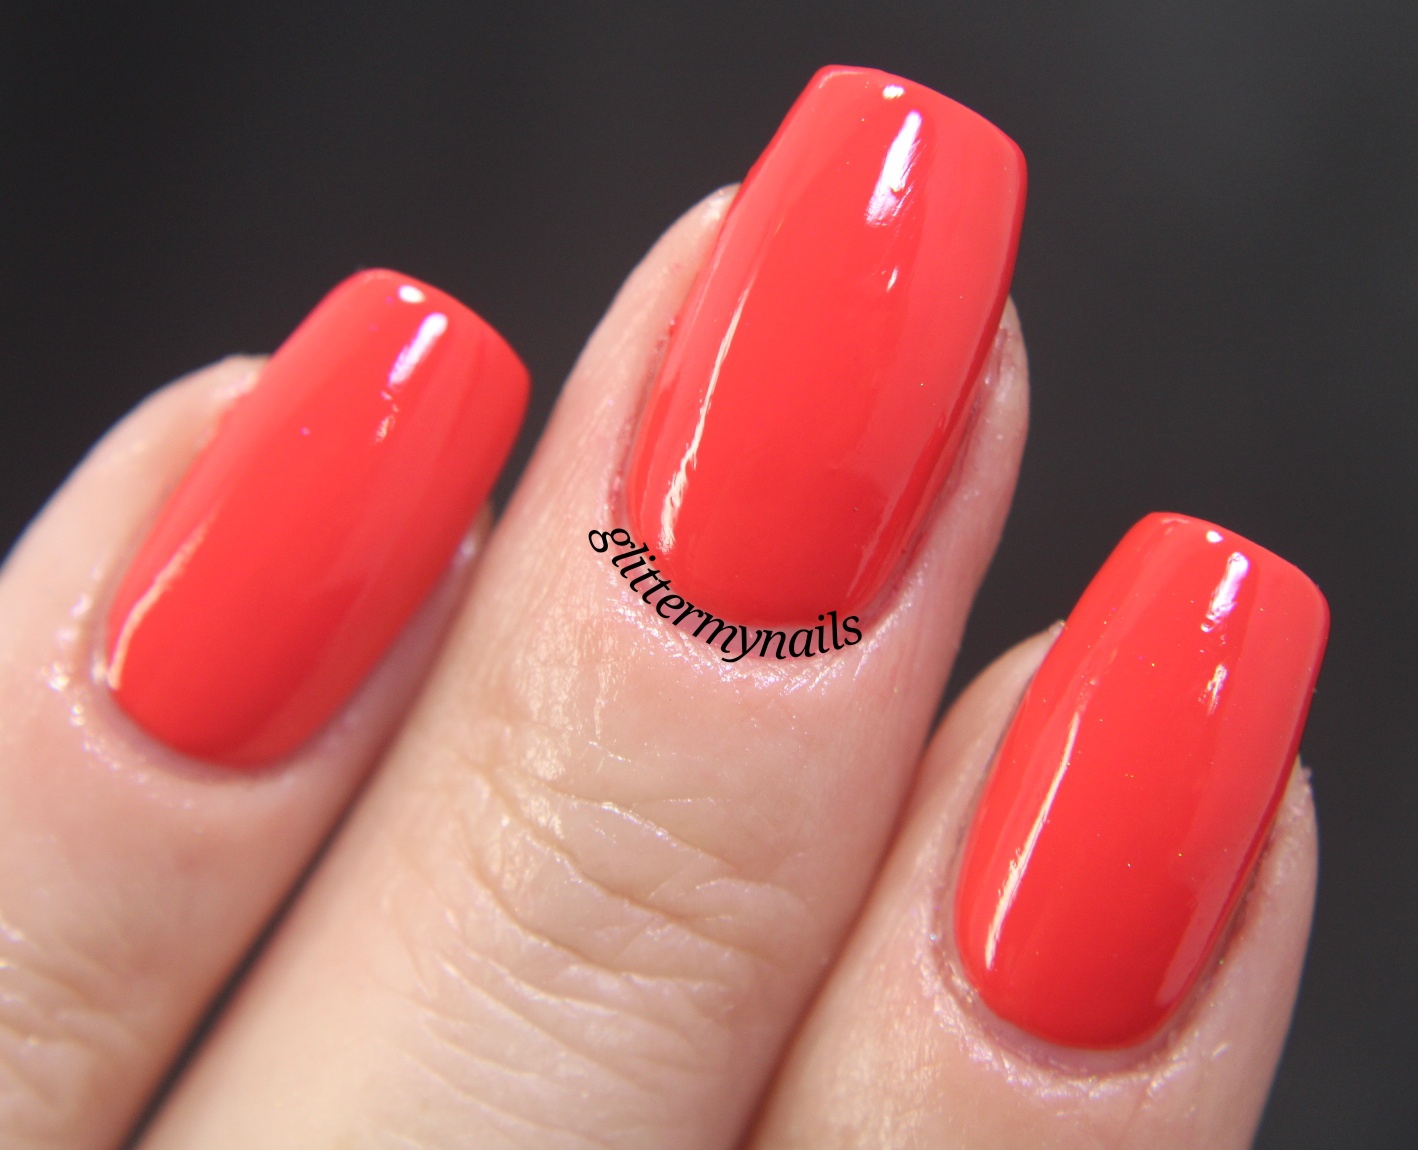 2. Essie Gel Couture in "Sizzling Hot" - wide 8